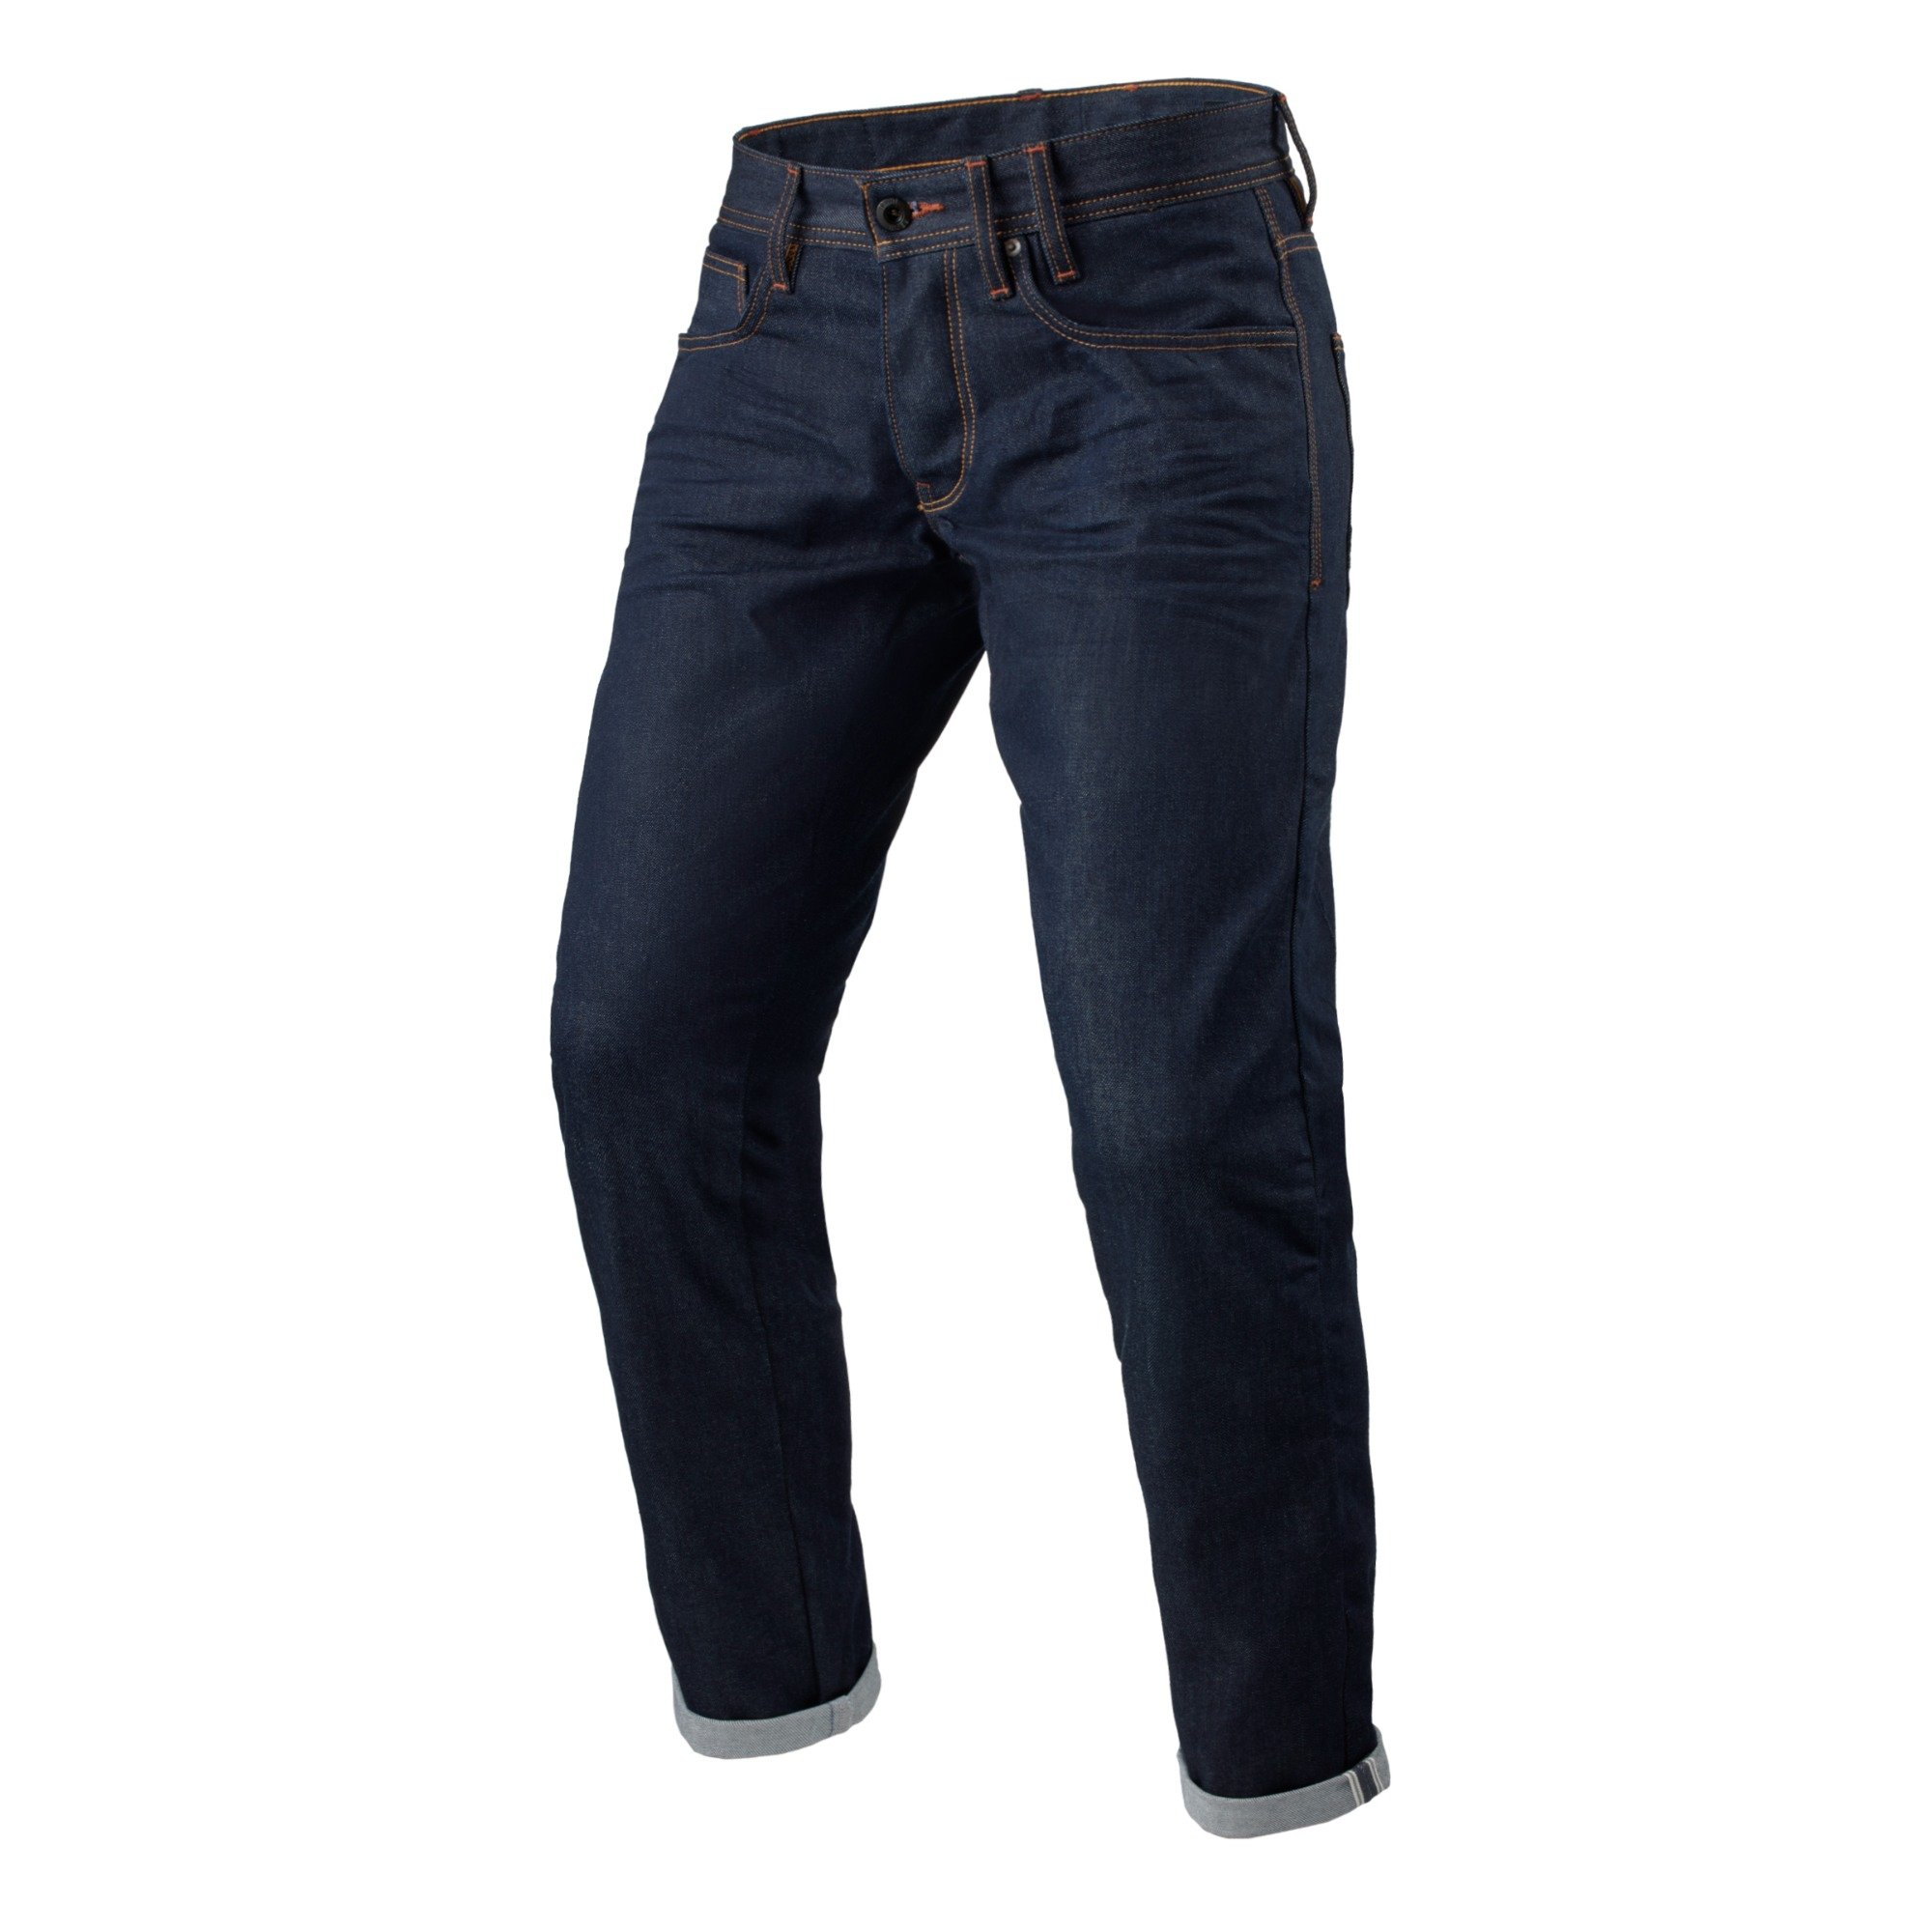 Image of REV'IT! Jeans Lewis Selvedge TF Dark Blue L34 Motorcycle Pants Size L34/W33 ID 8700001357975